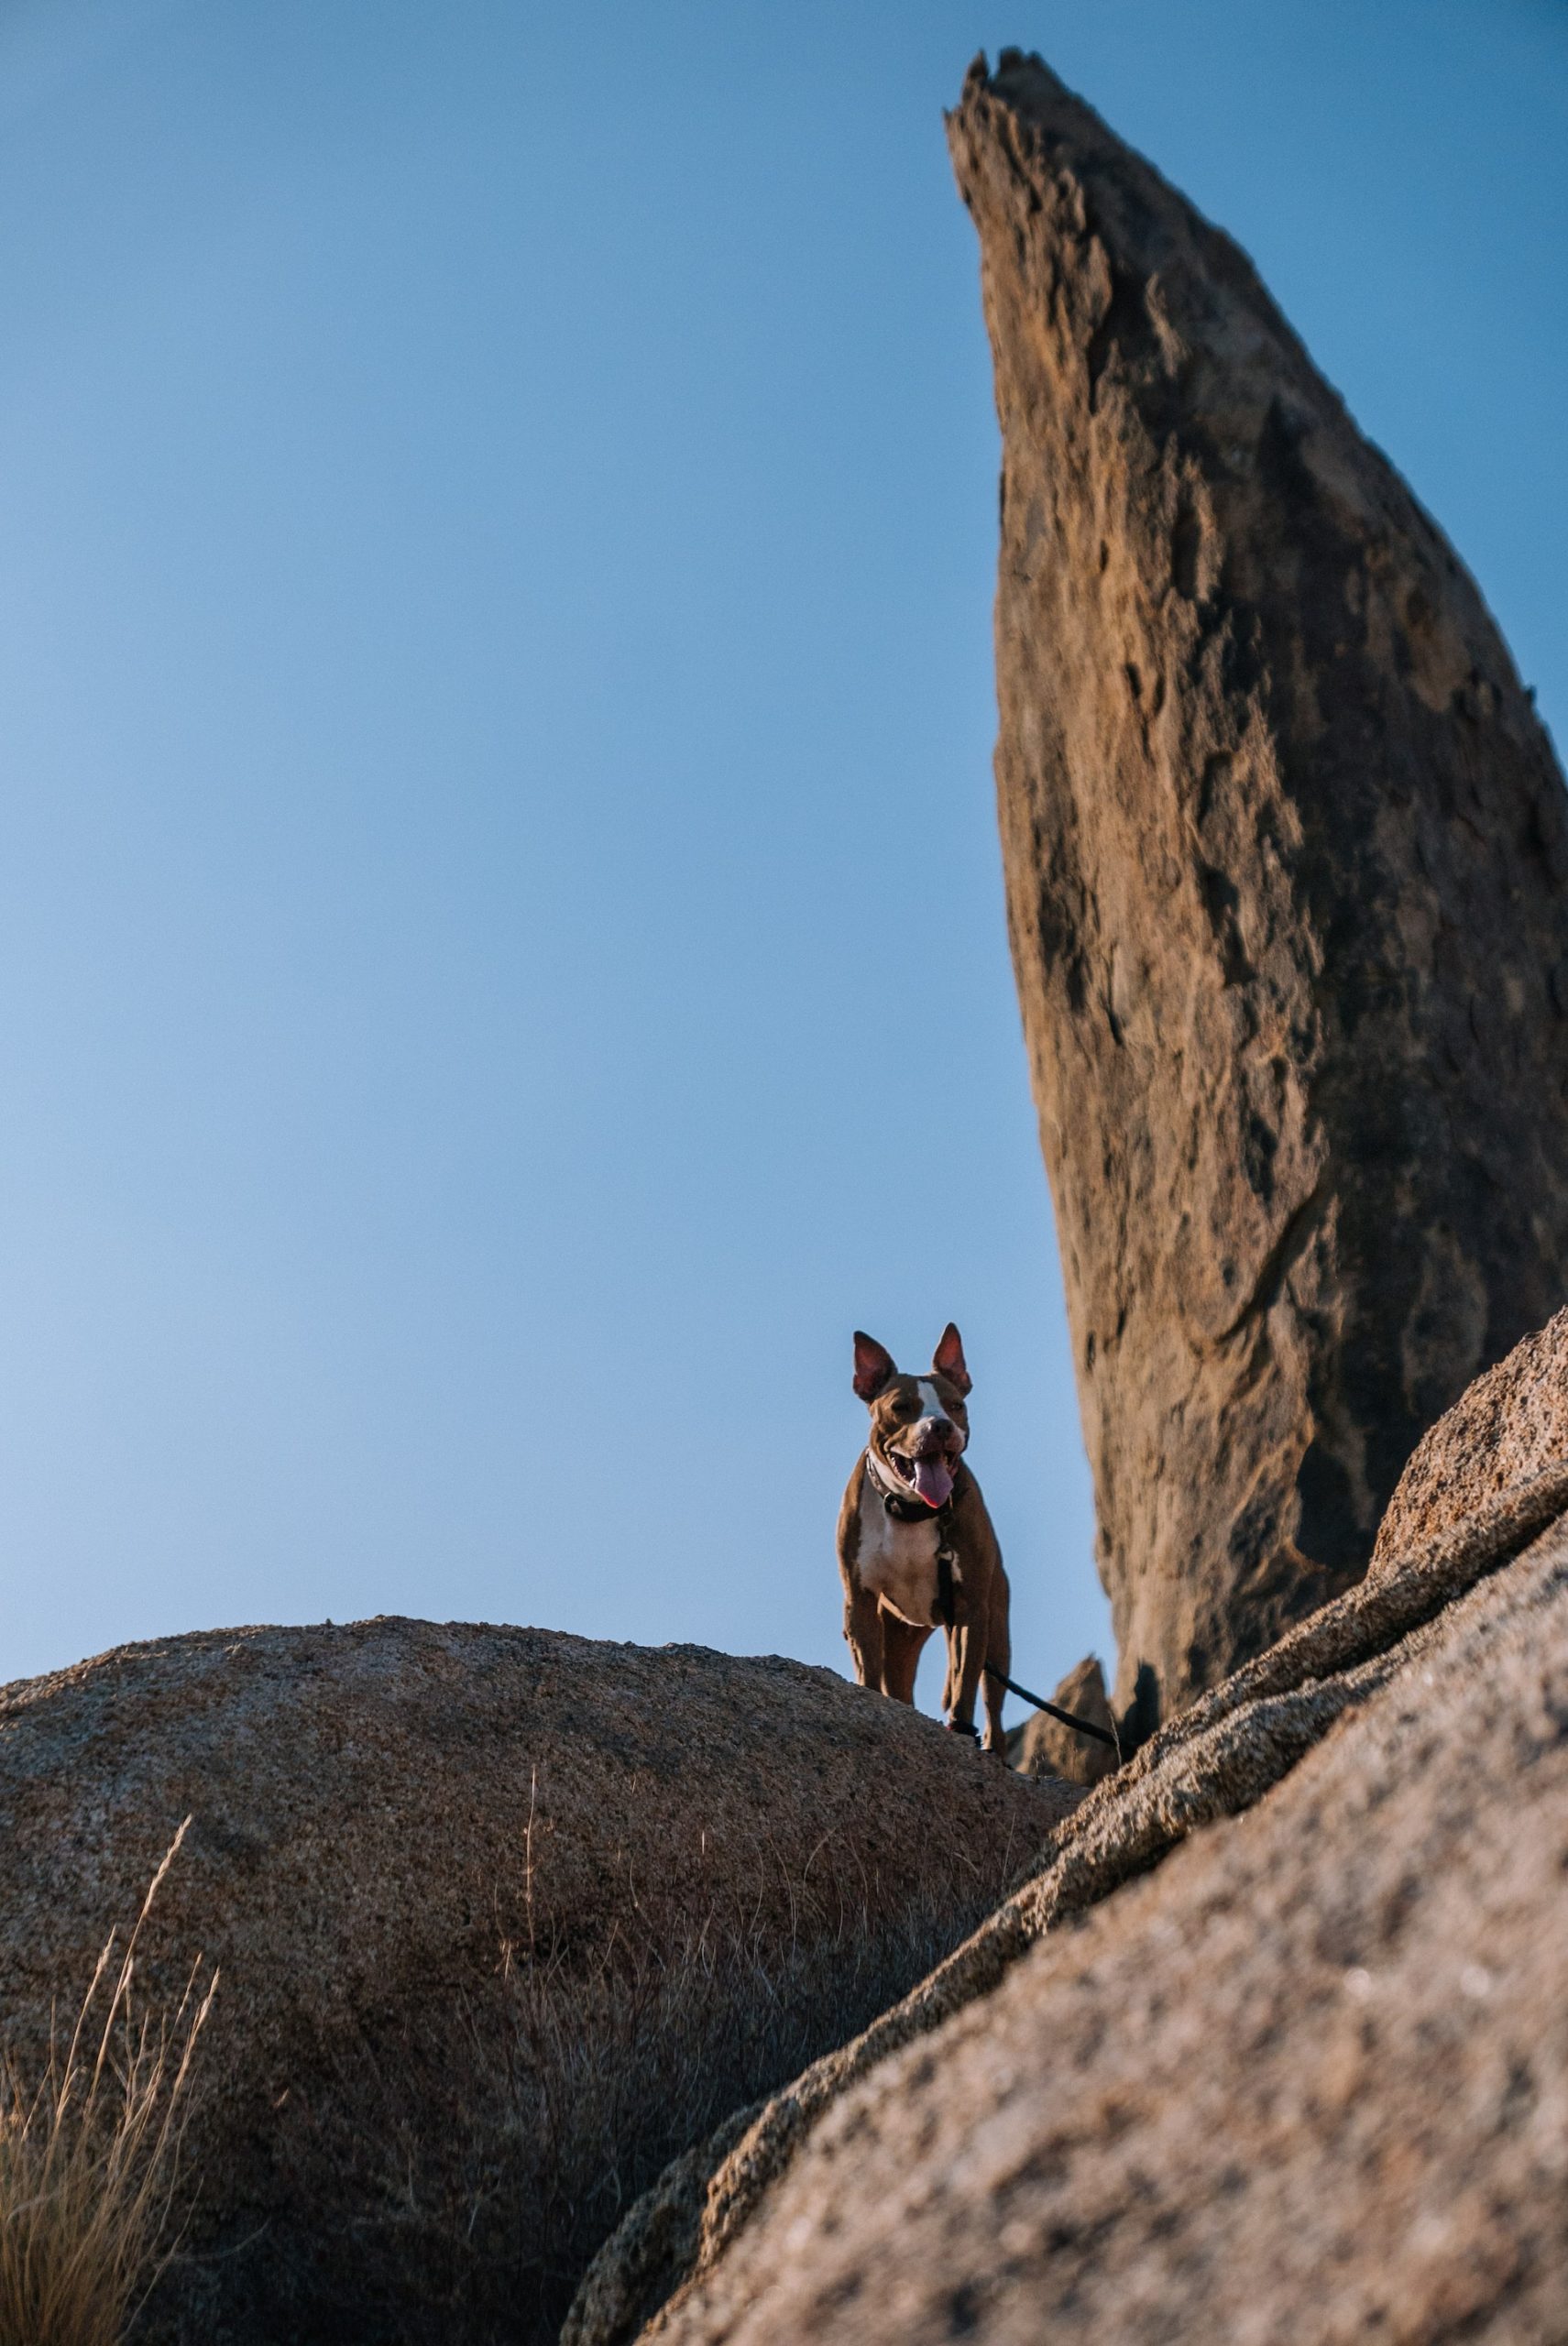 Black dog looking down from a ledge surrounded by tall boulders